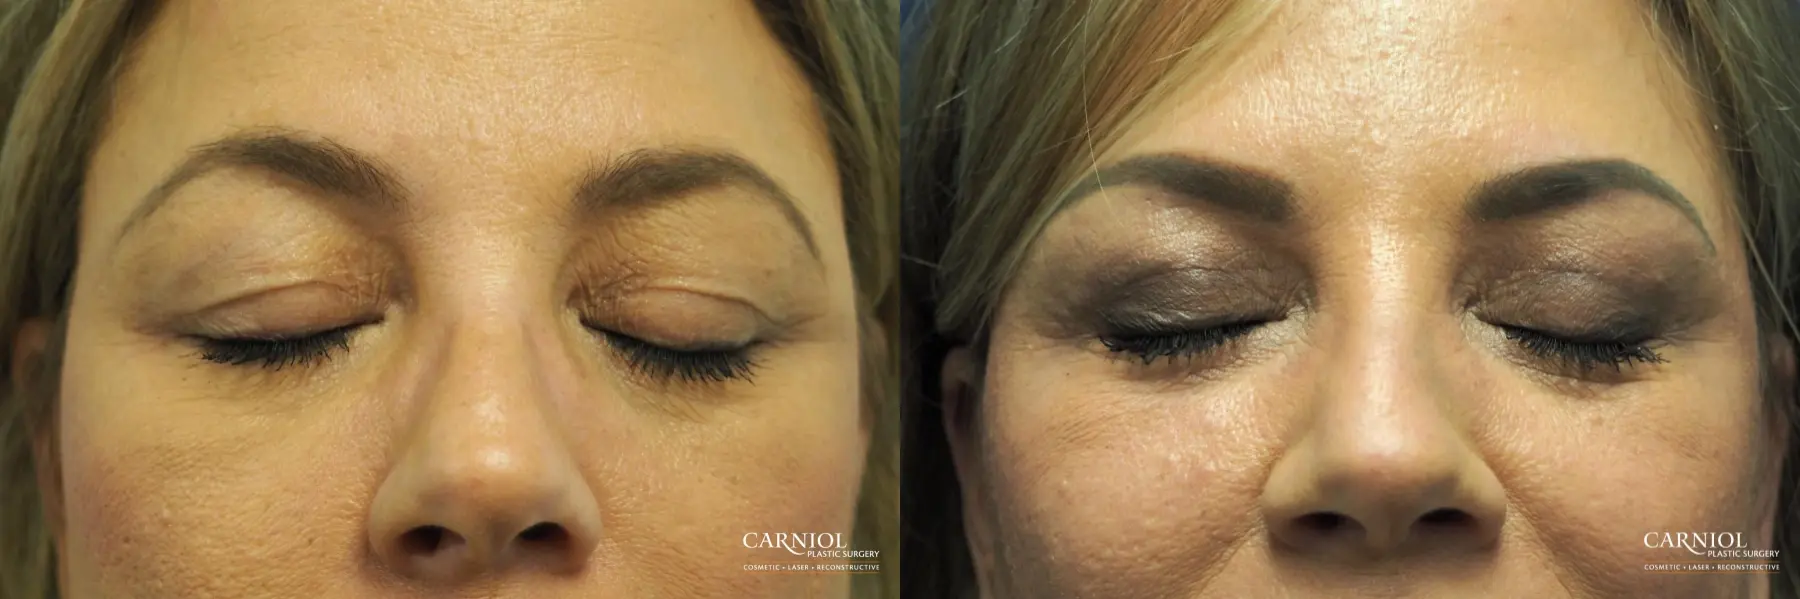 Blepharoplasty: Patient 6 - Before and After 2